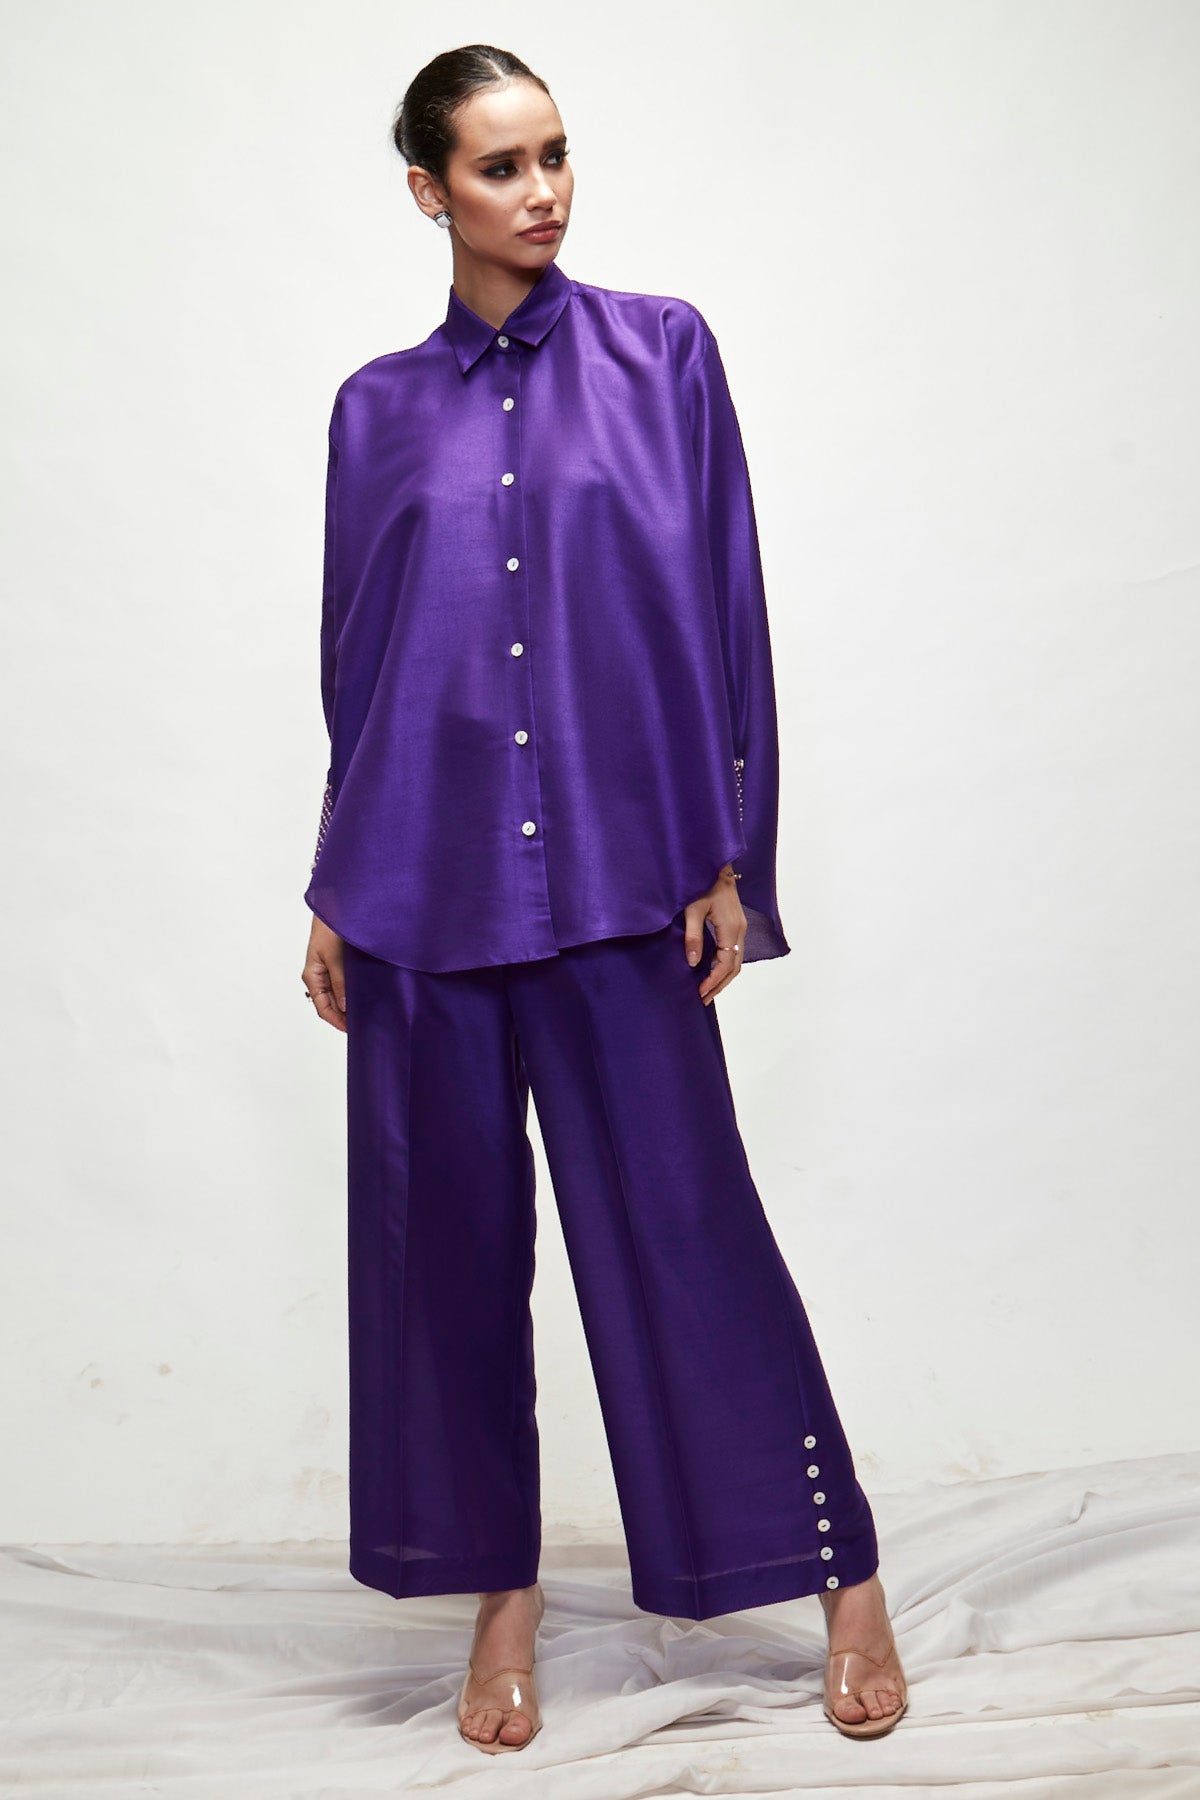 Designer Ranian Violet silk blend relaxed co-ord set with straight pants and shirt with broad cuffs and pearls For Women Online at ScrollnShops